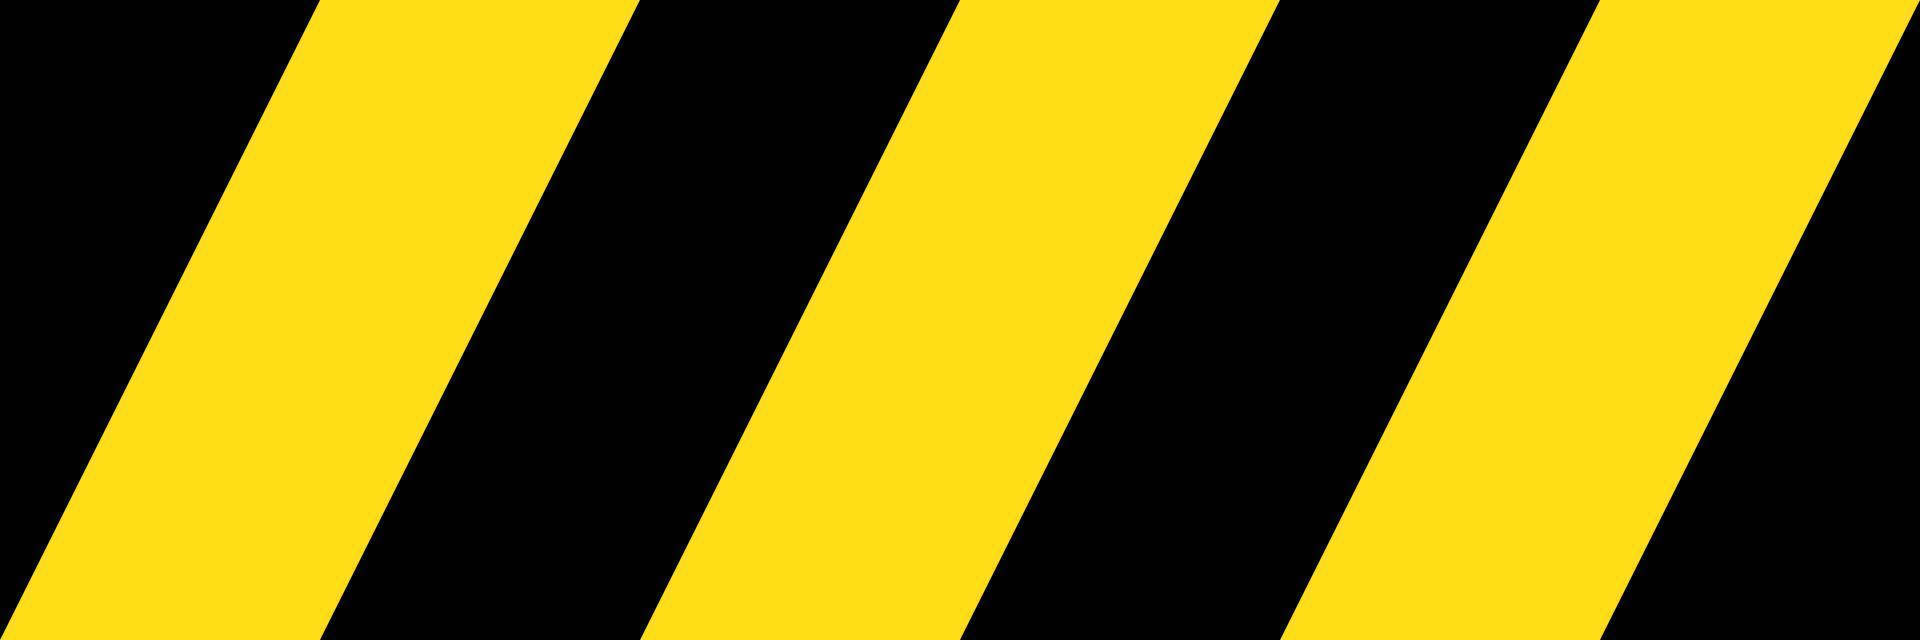 Yellow and black caution tape, barricade tape seamless striped pattern or texture. vector